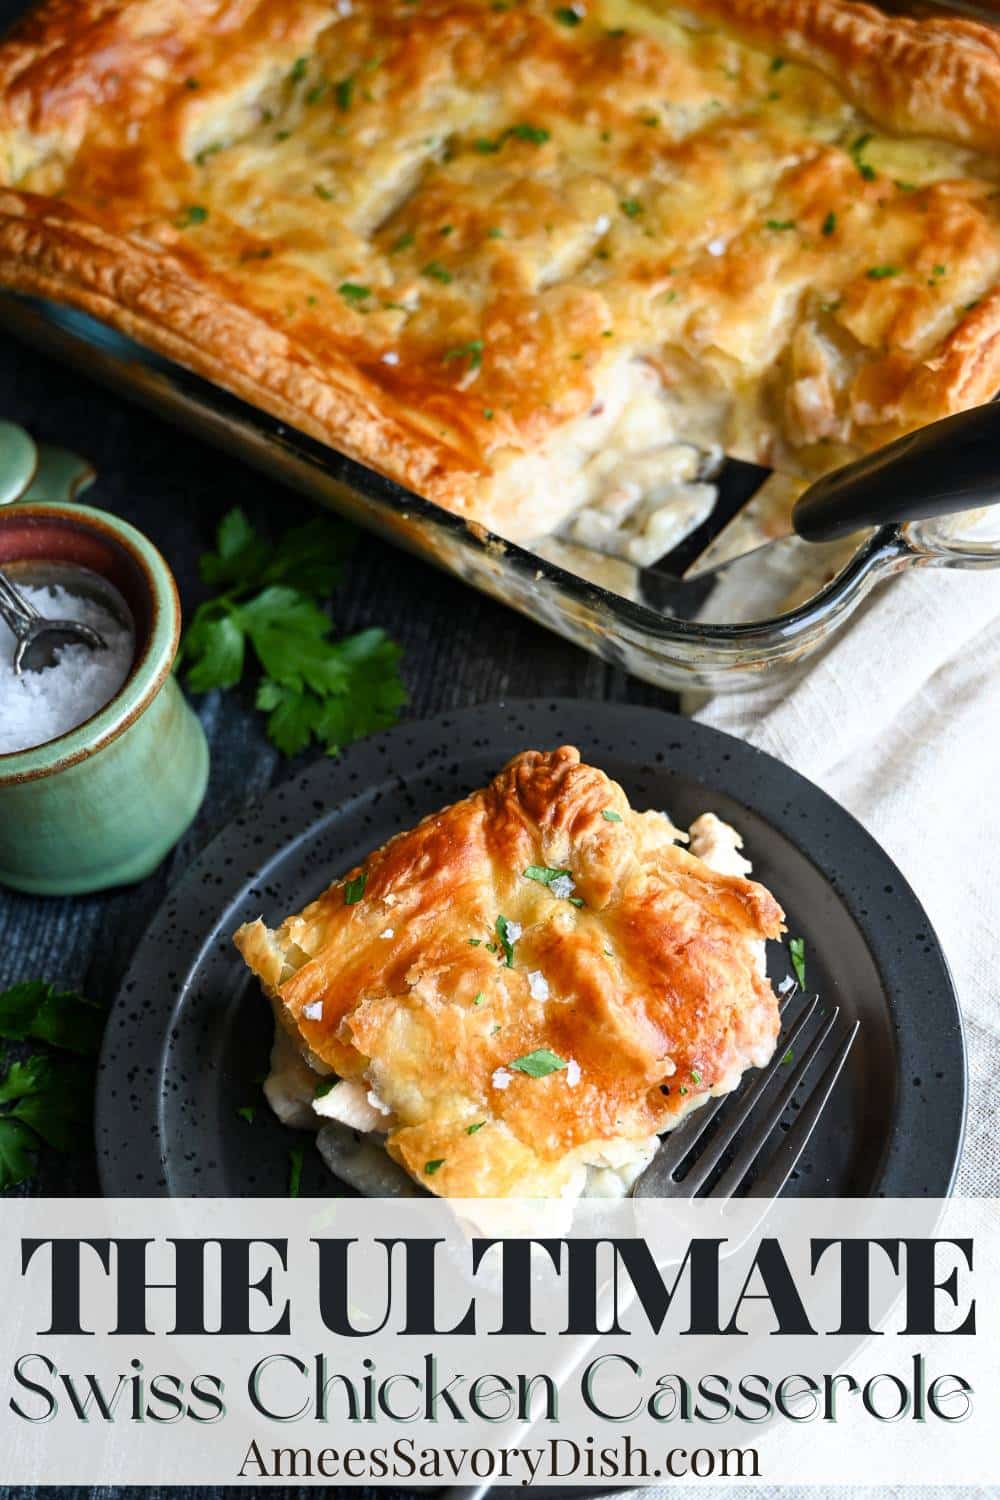 This Swiss Chicken Casserole features layers of creamy chicken, slivered almonds, and melty cheese, all topped with a flaky puff pastry crust and baked to golden-brown and bubbly perfection. via @Ameessavorydish